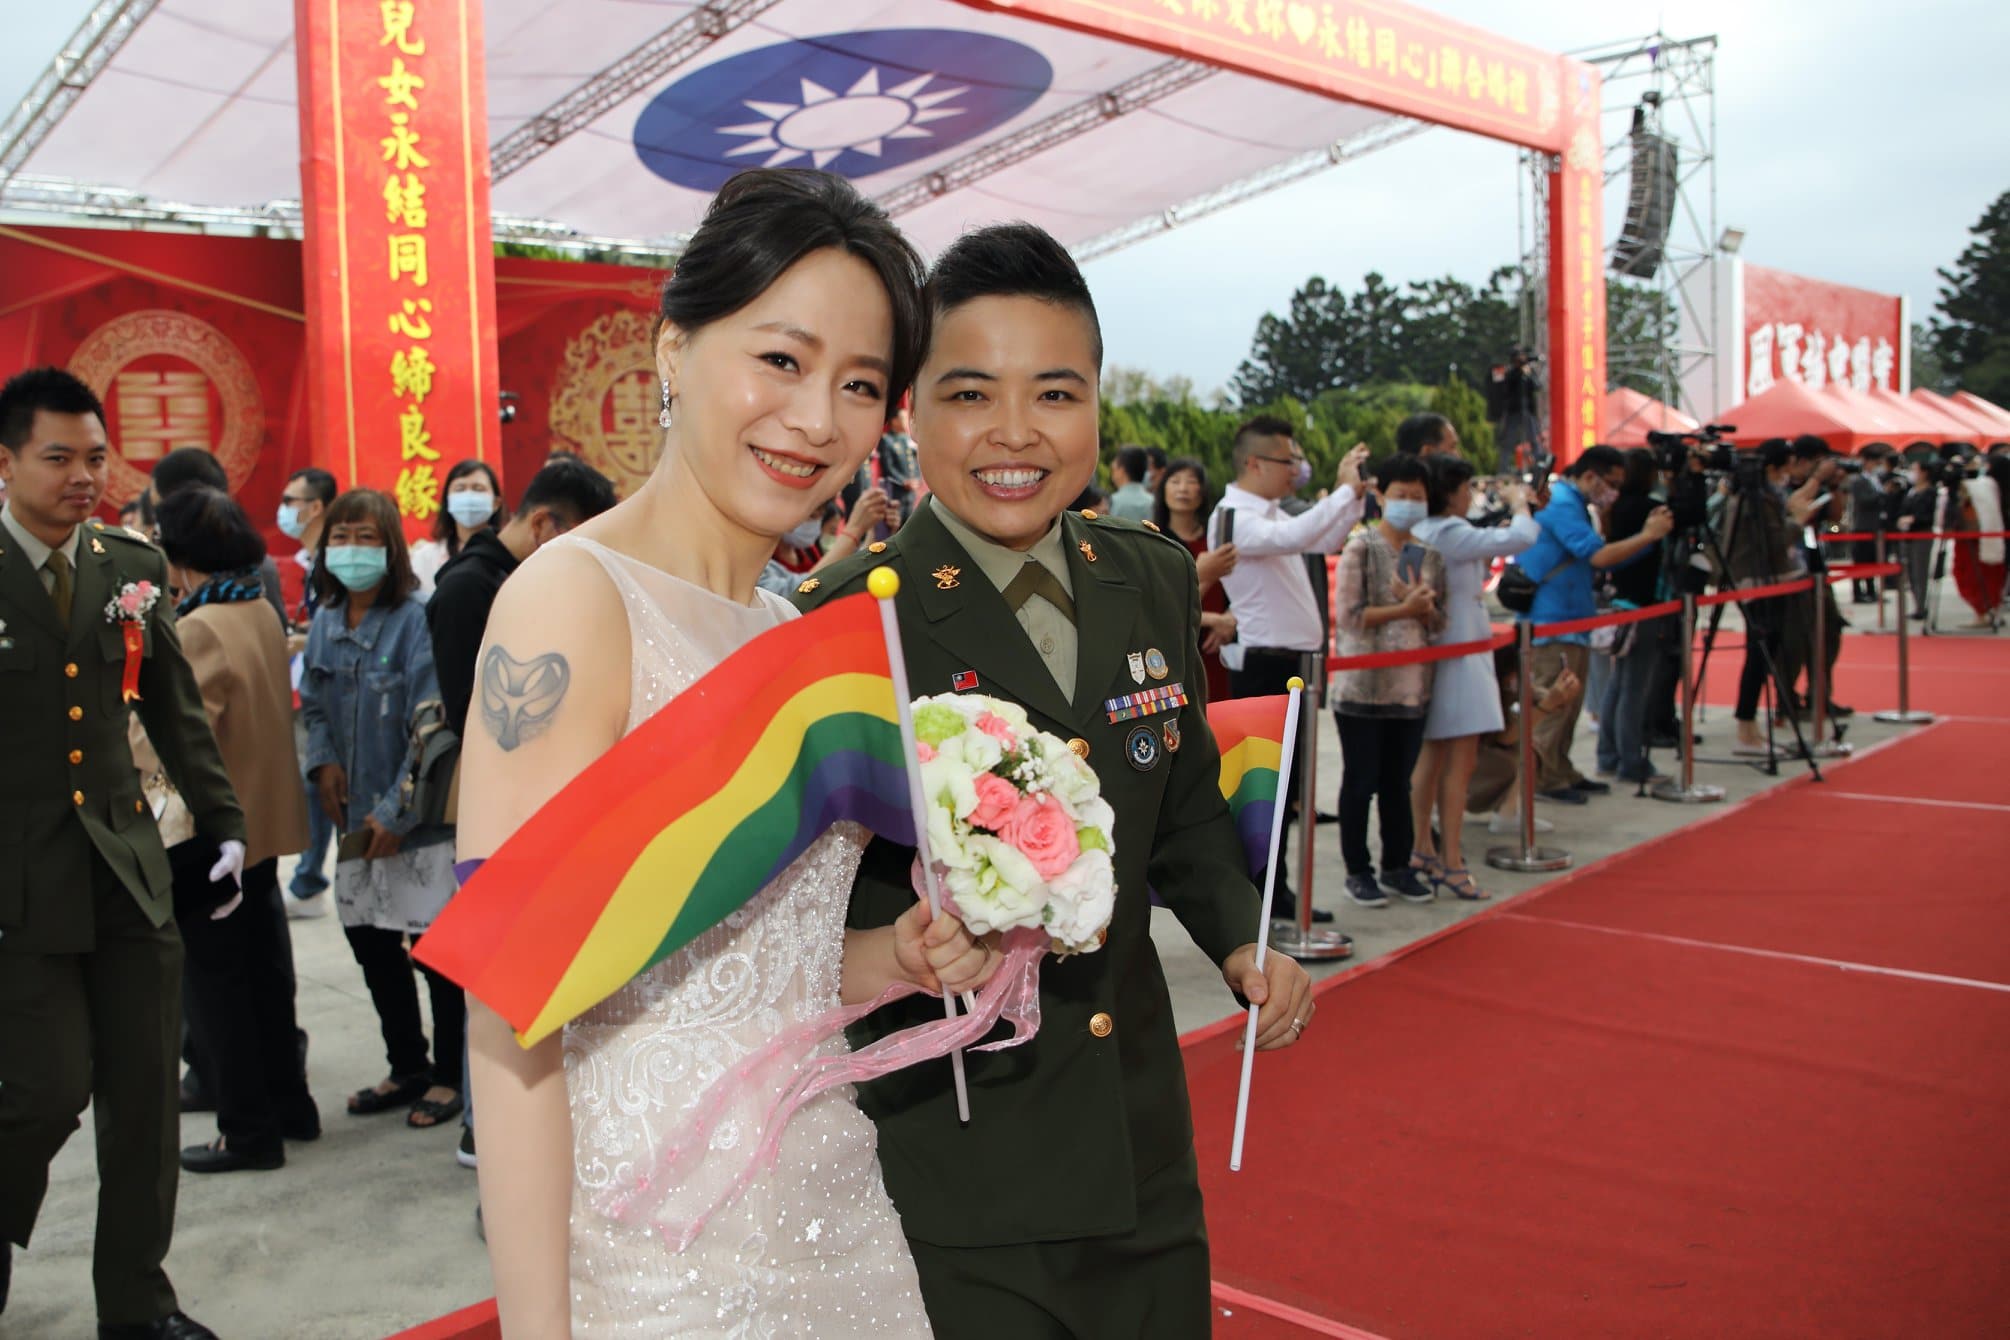 Taiwan Lesbian Couples Wed In Mass Military Wedding For